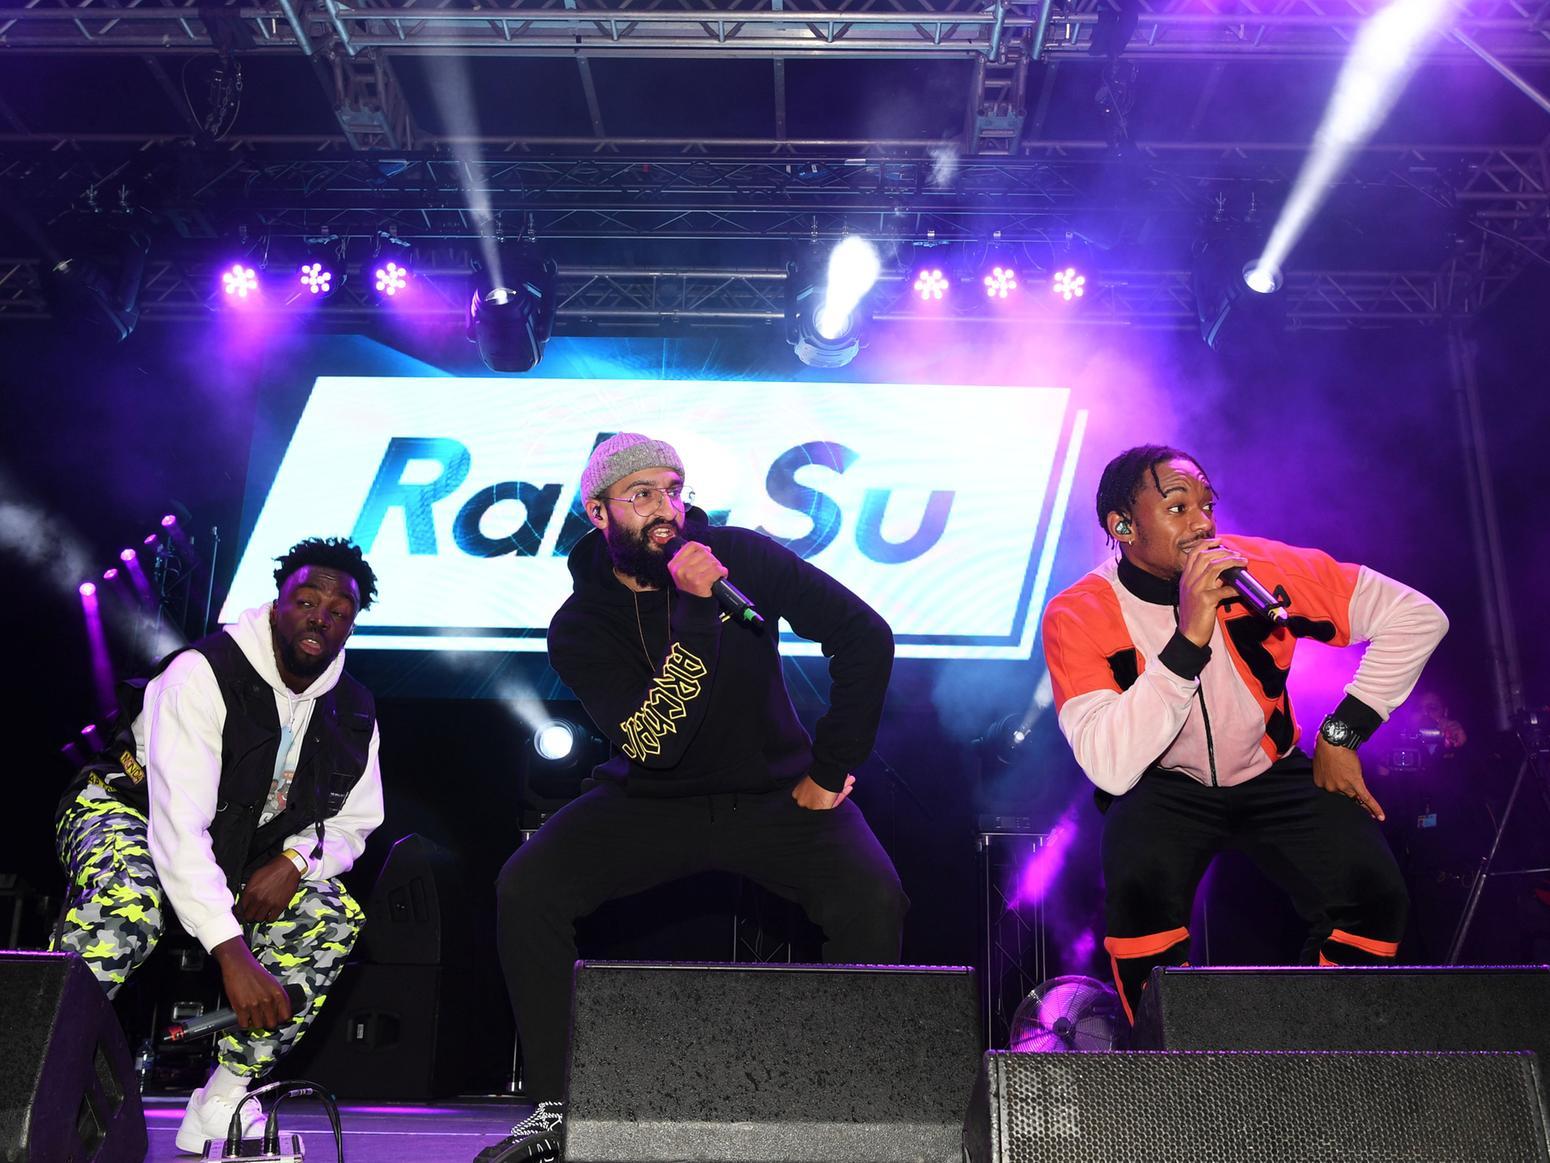 Rak-Su performed a new track 'La Bomba' to excited Leeds crowds.